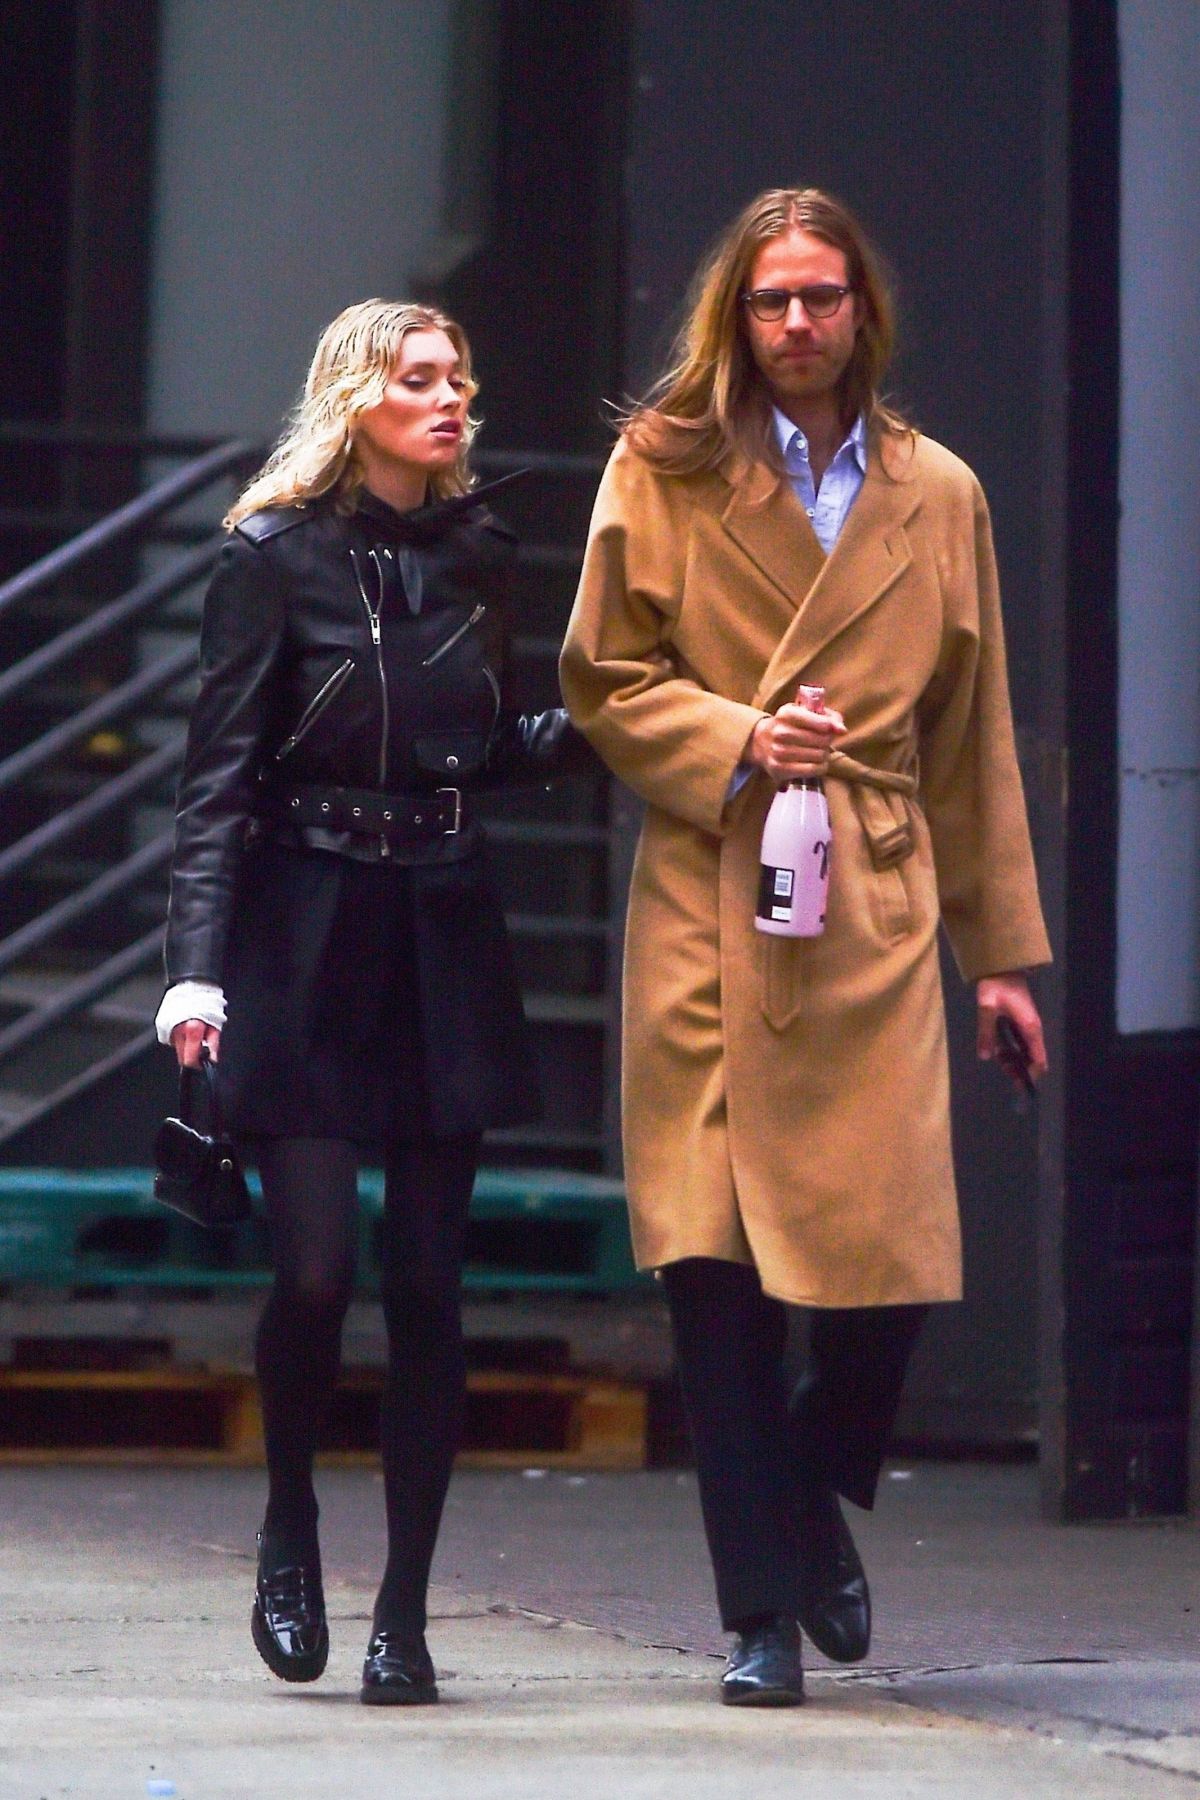 elsa-hosk-and-tom-daly-out-in-new-york-04-16-2019-3.jpg